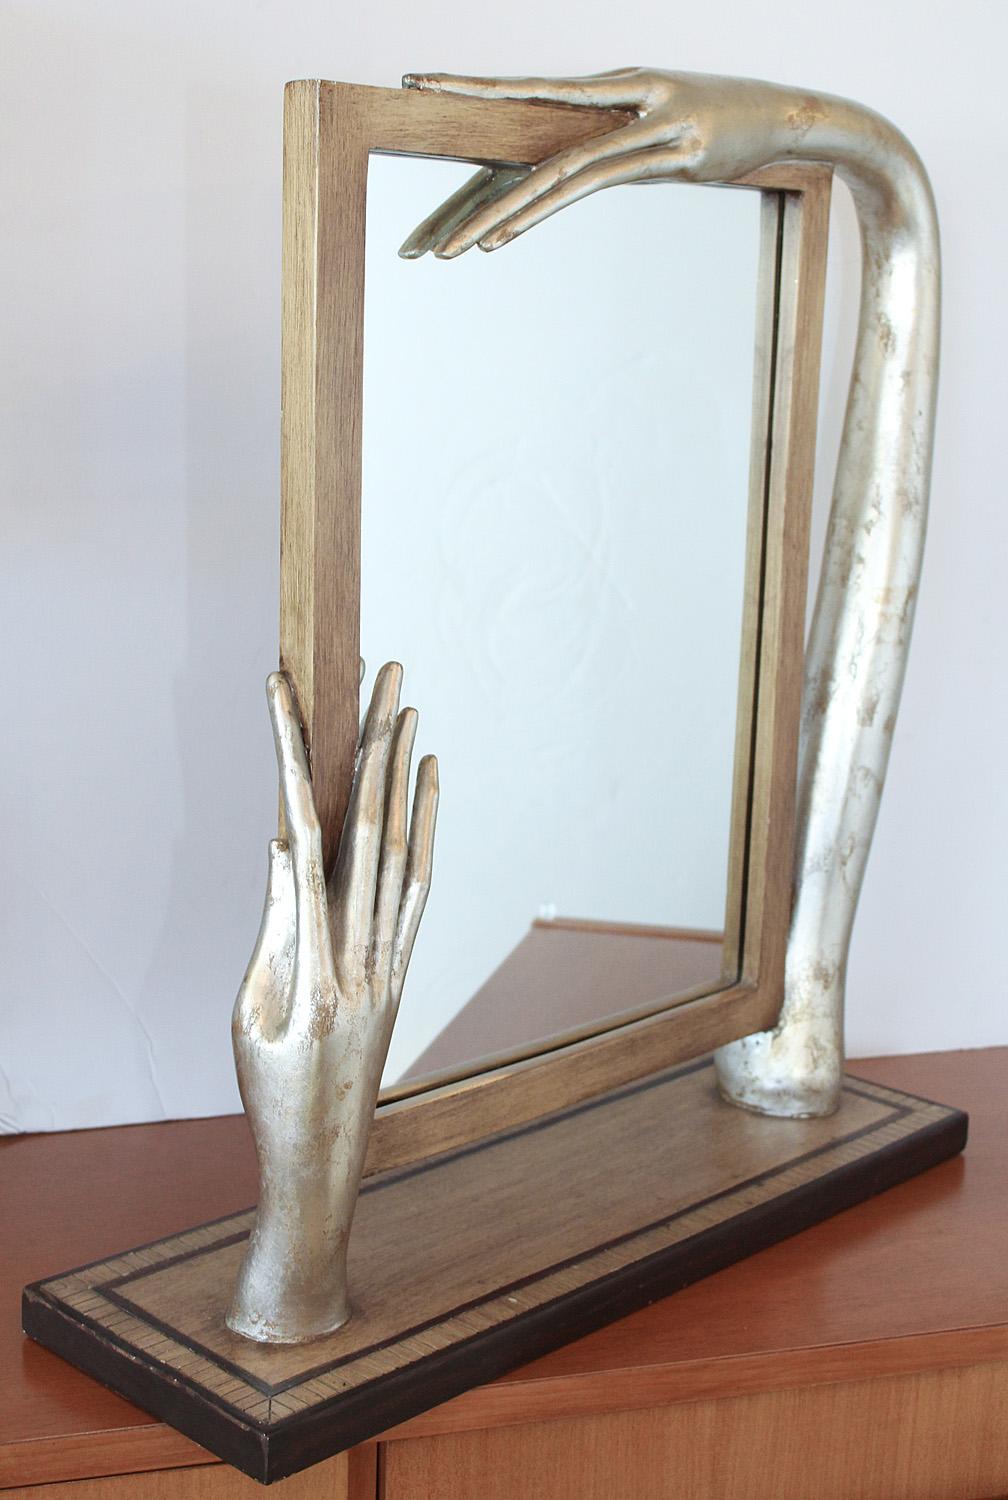 Silver leaf and painted wood mirror with surrealistic elongated arm and hands in the manner of Amadeo Modigliani, circa 1980. Very good condition.